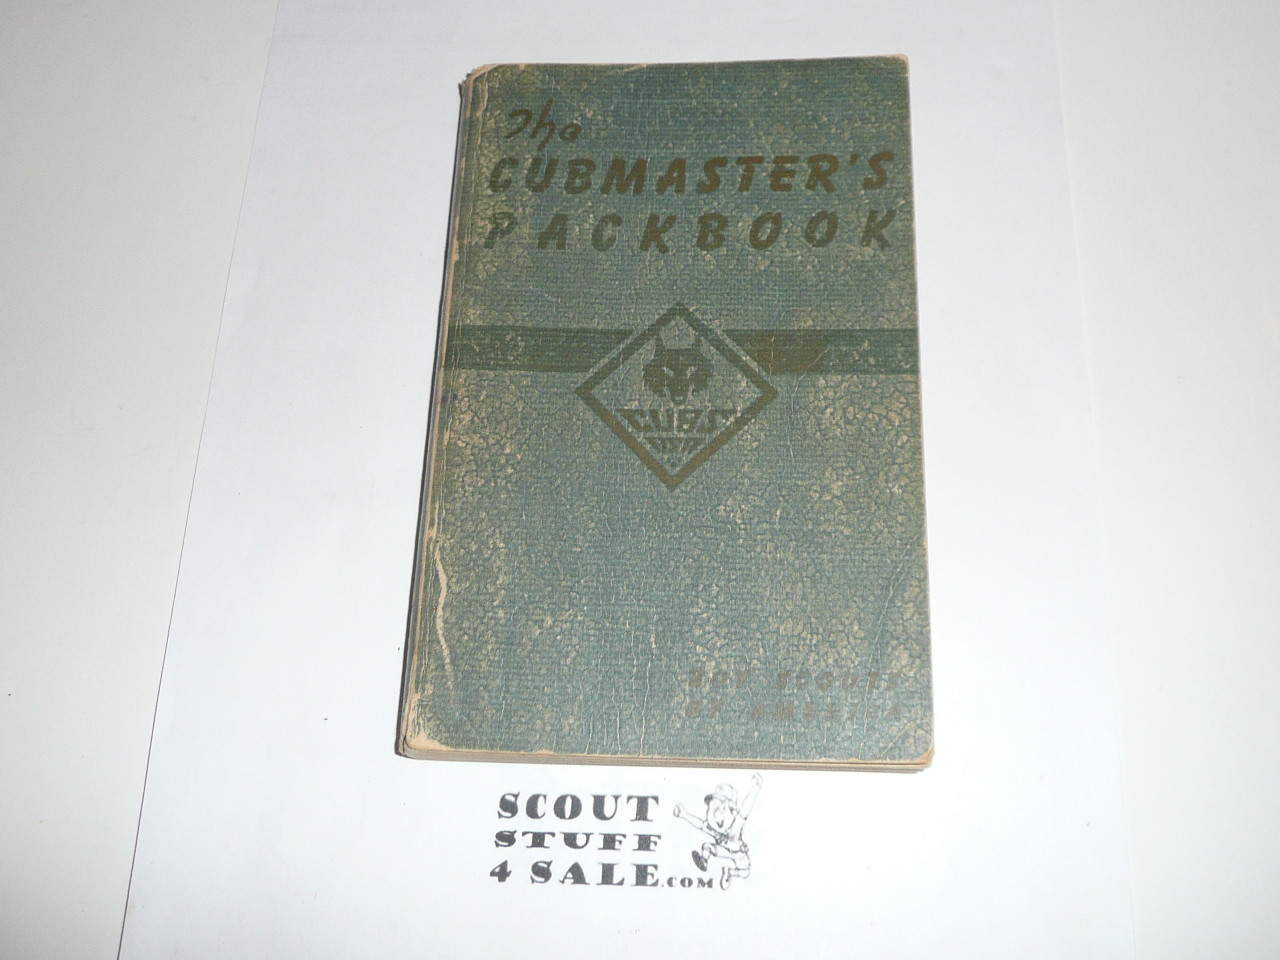 1945 Cubmaster's Packbook, Cub Scout, 11-45 Printing